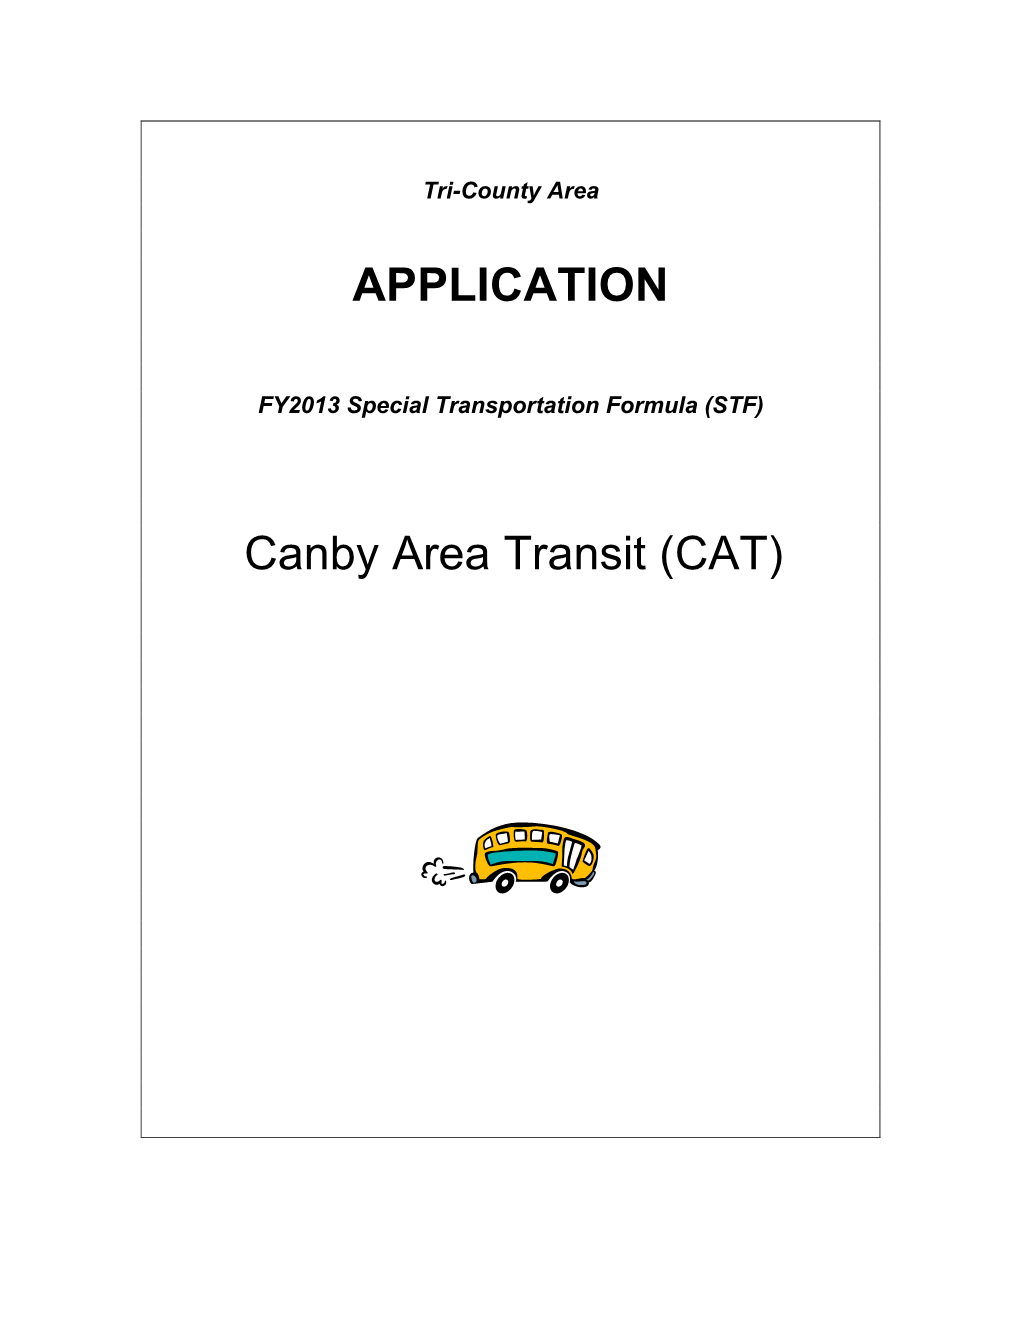 18-Canby Area Transit